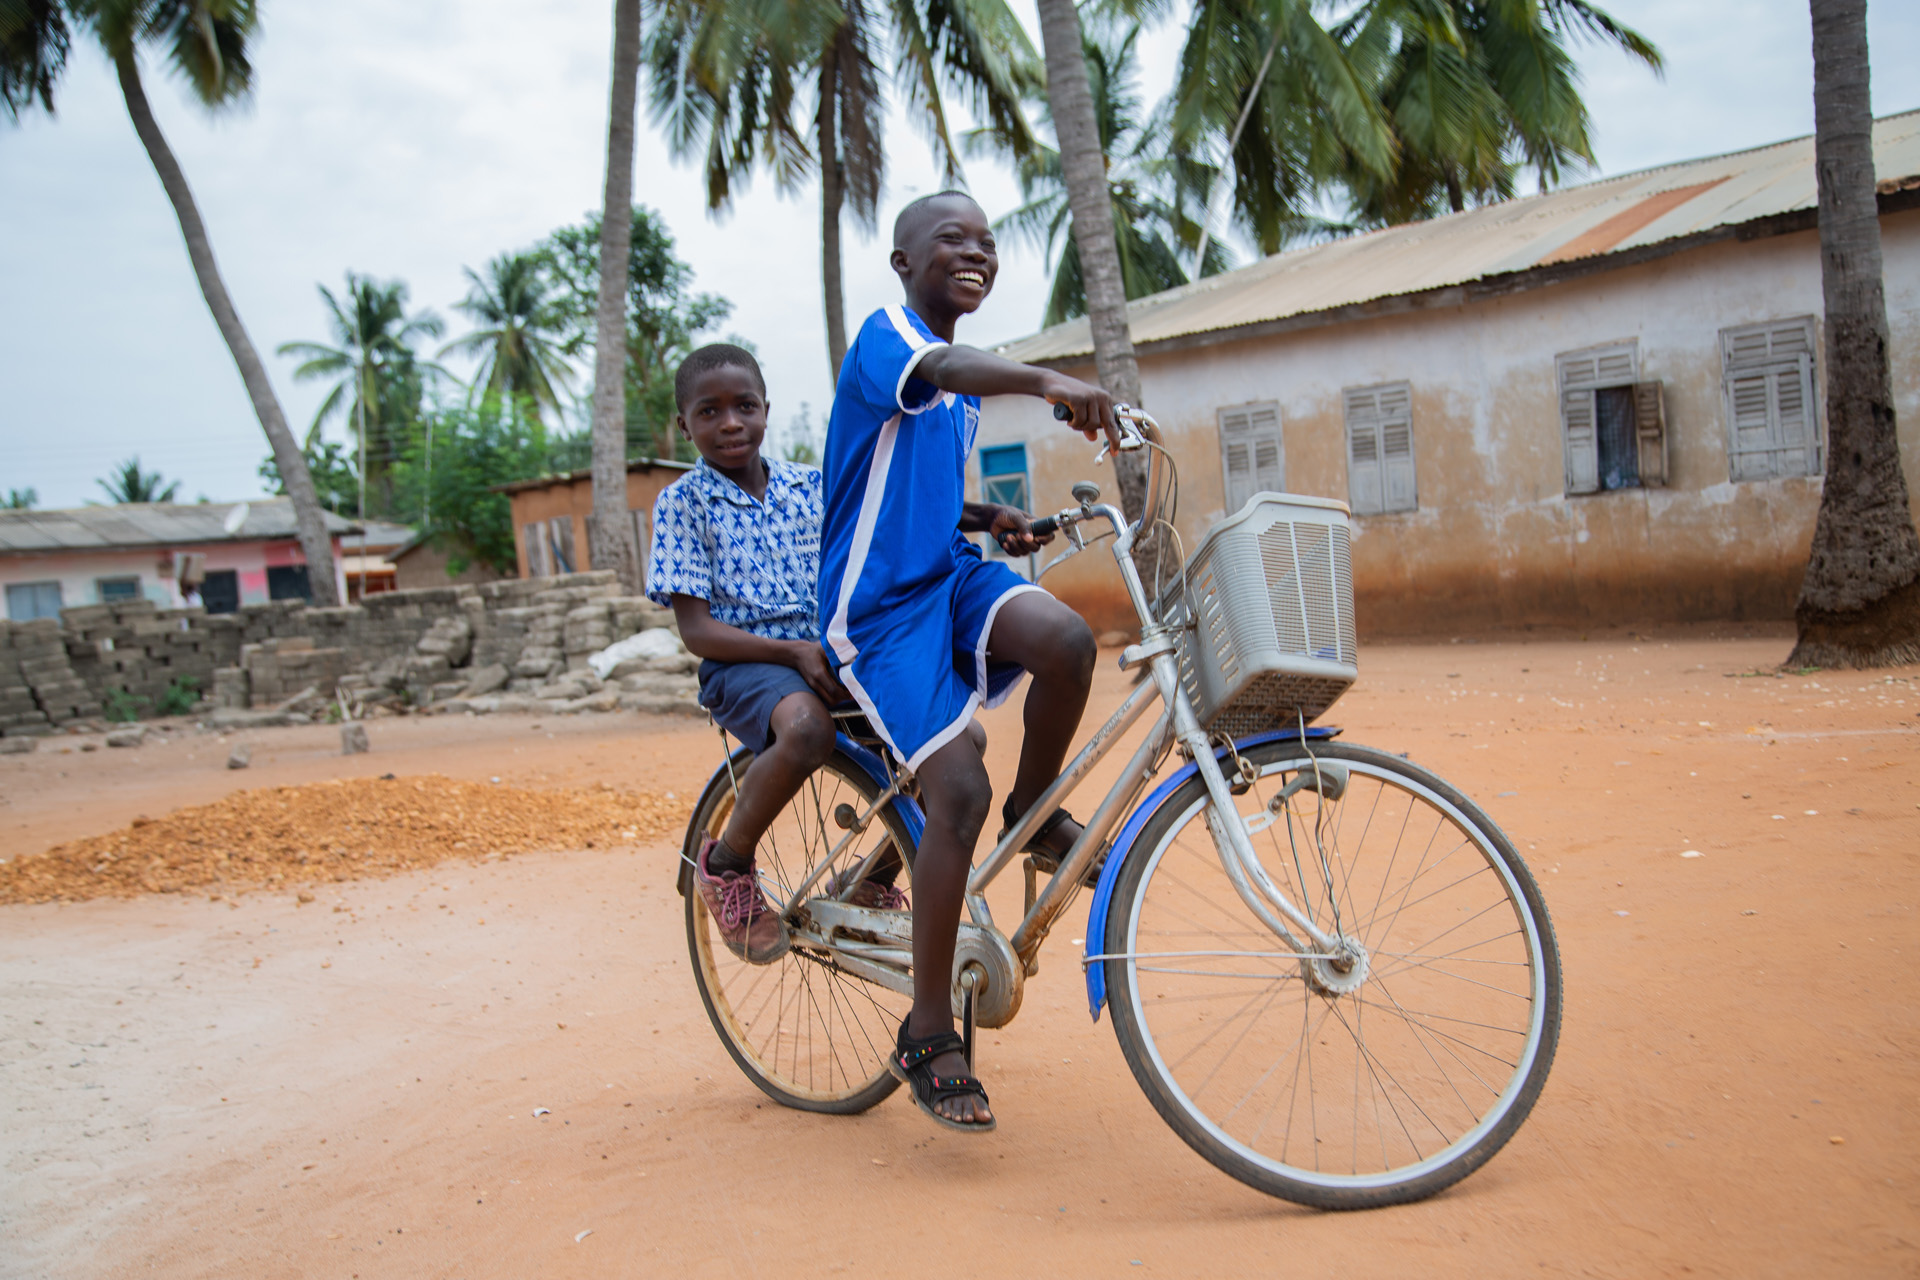 Boys in Ghana ride on a bicycle